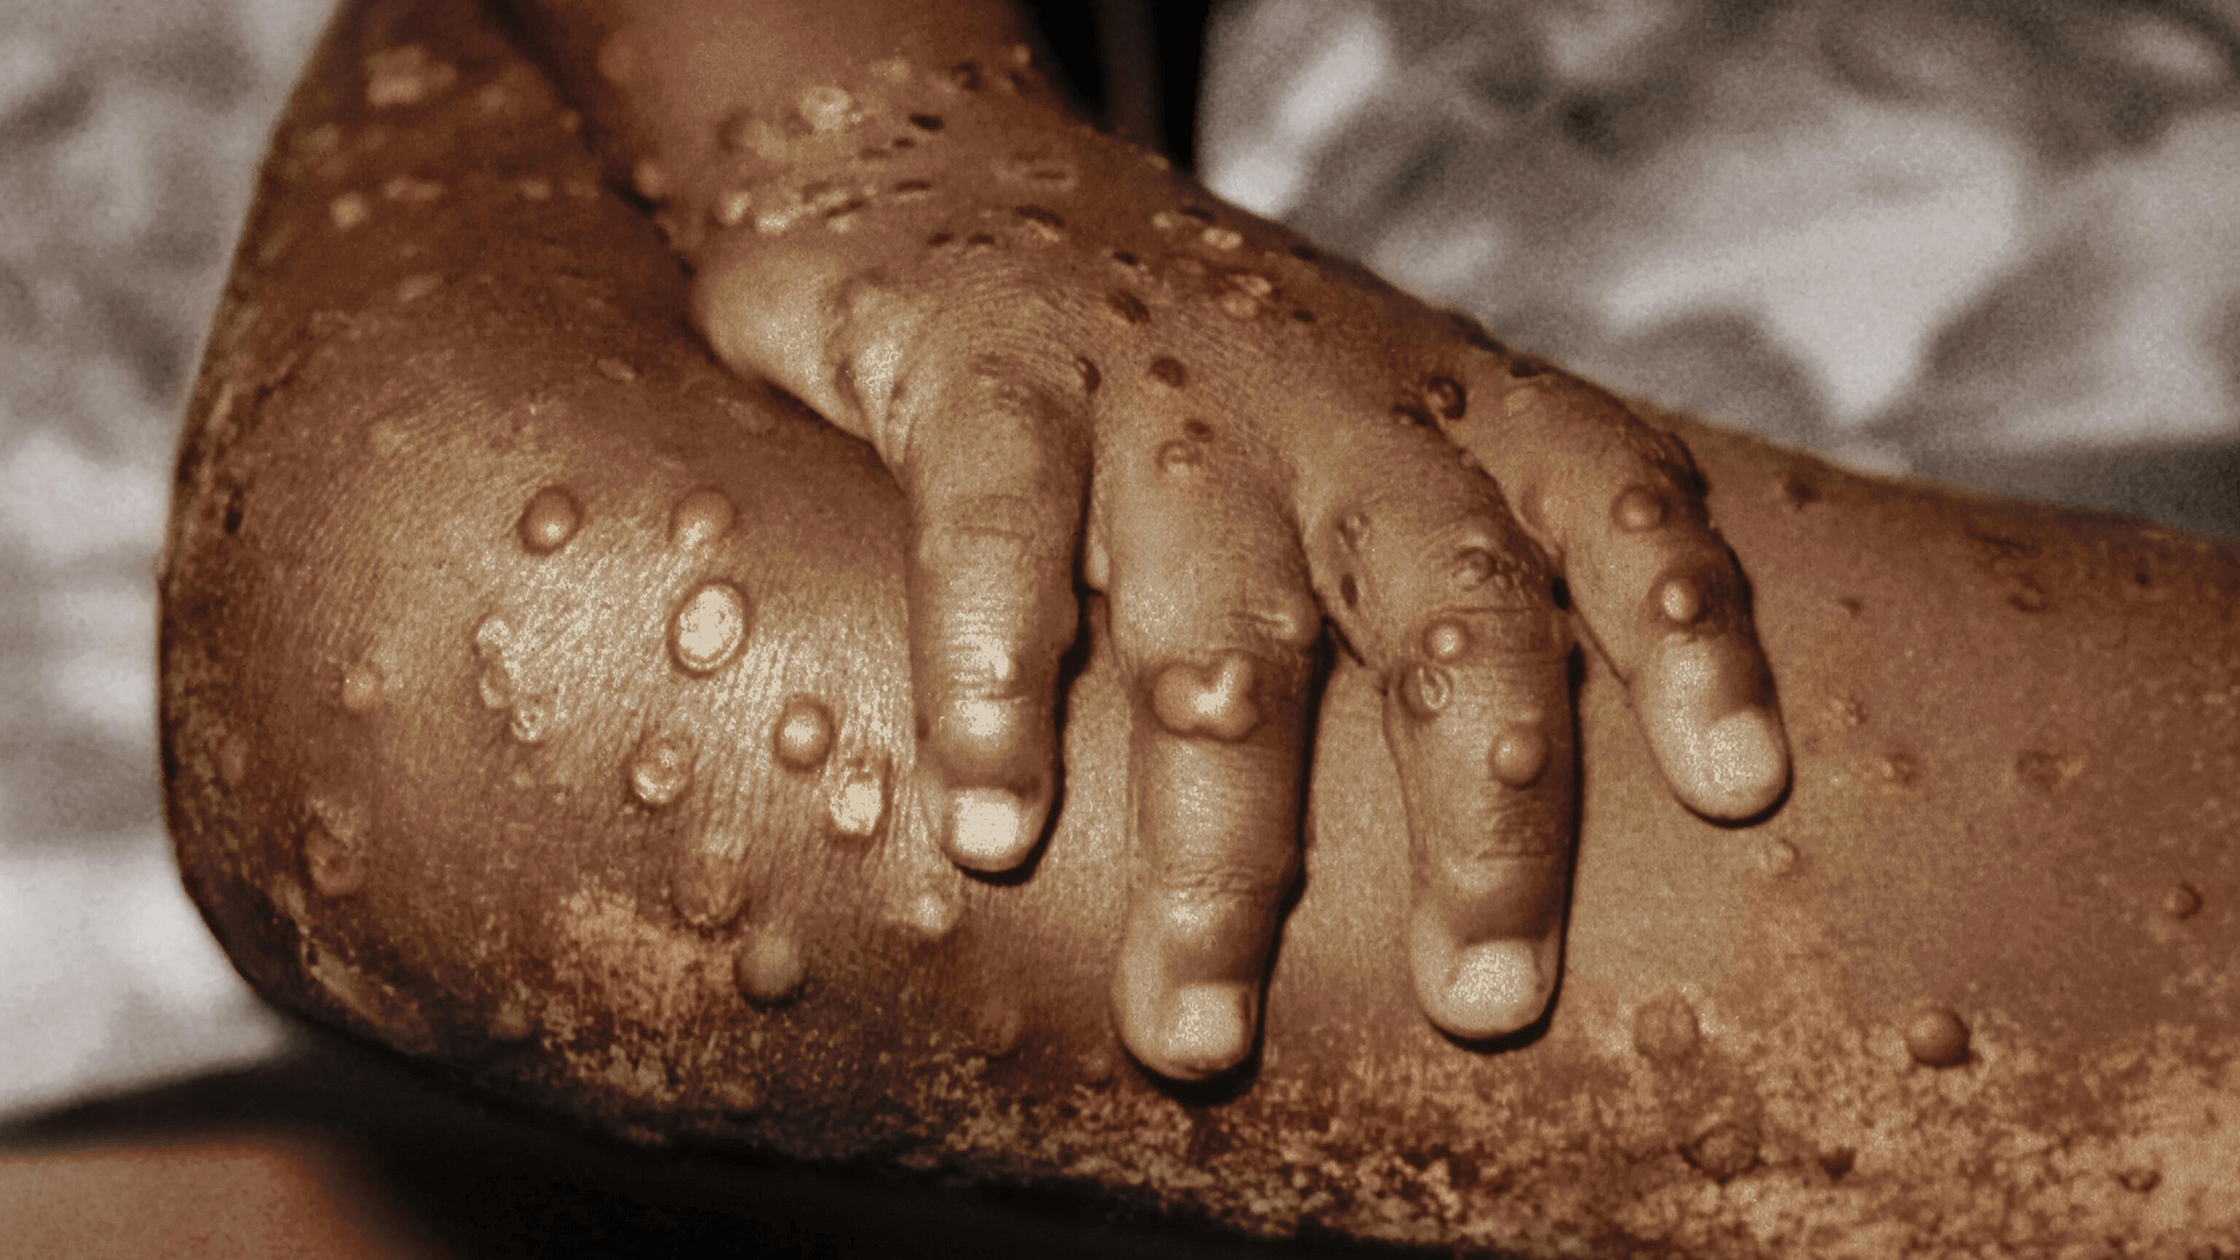 Causes And Symptoms Of MonkeyPox